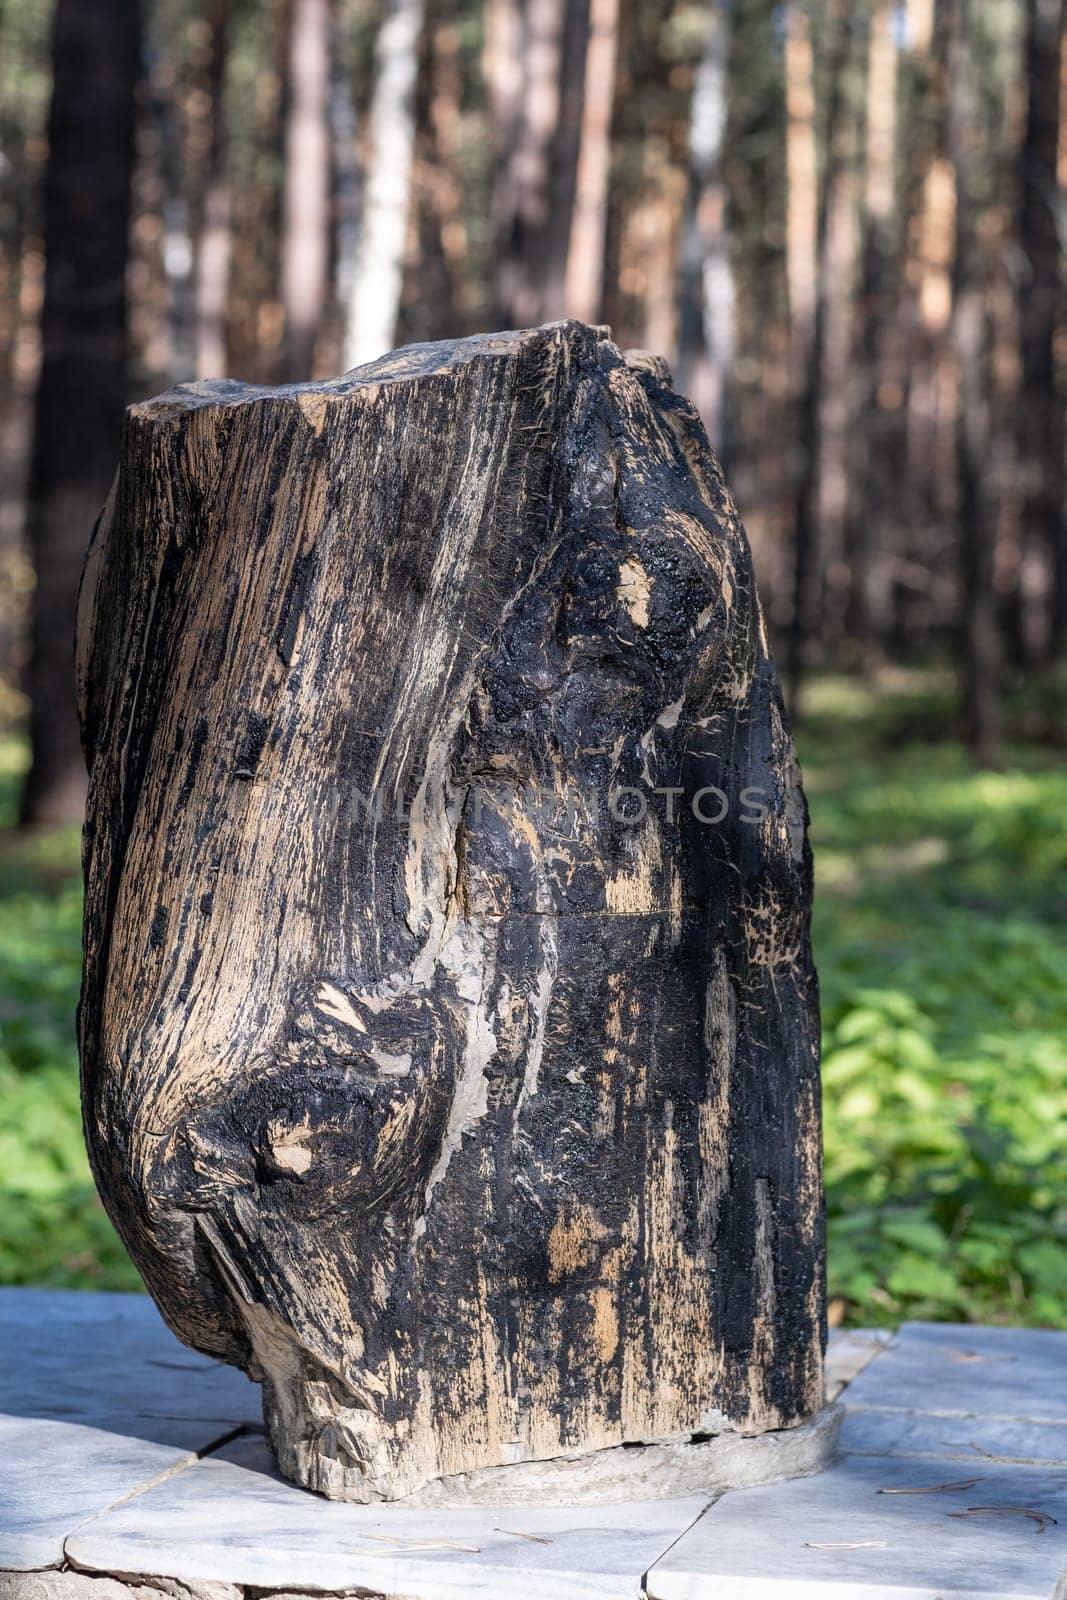 Petrified wood in the park as an expanse, abstract pattern of cracks, spots and stains, natural background, backgrounds and textures